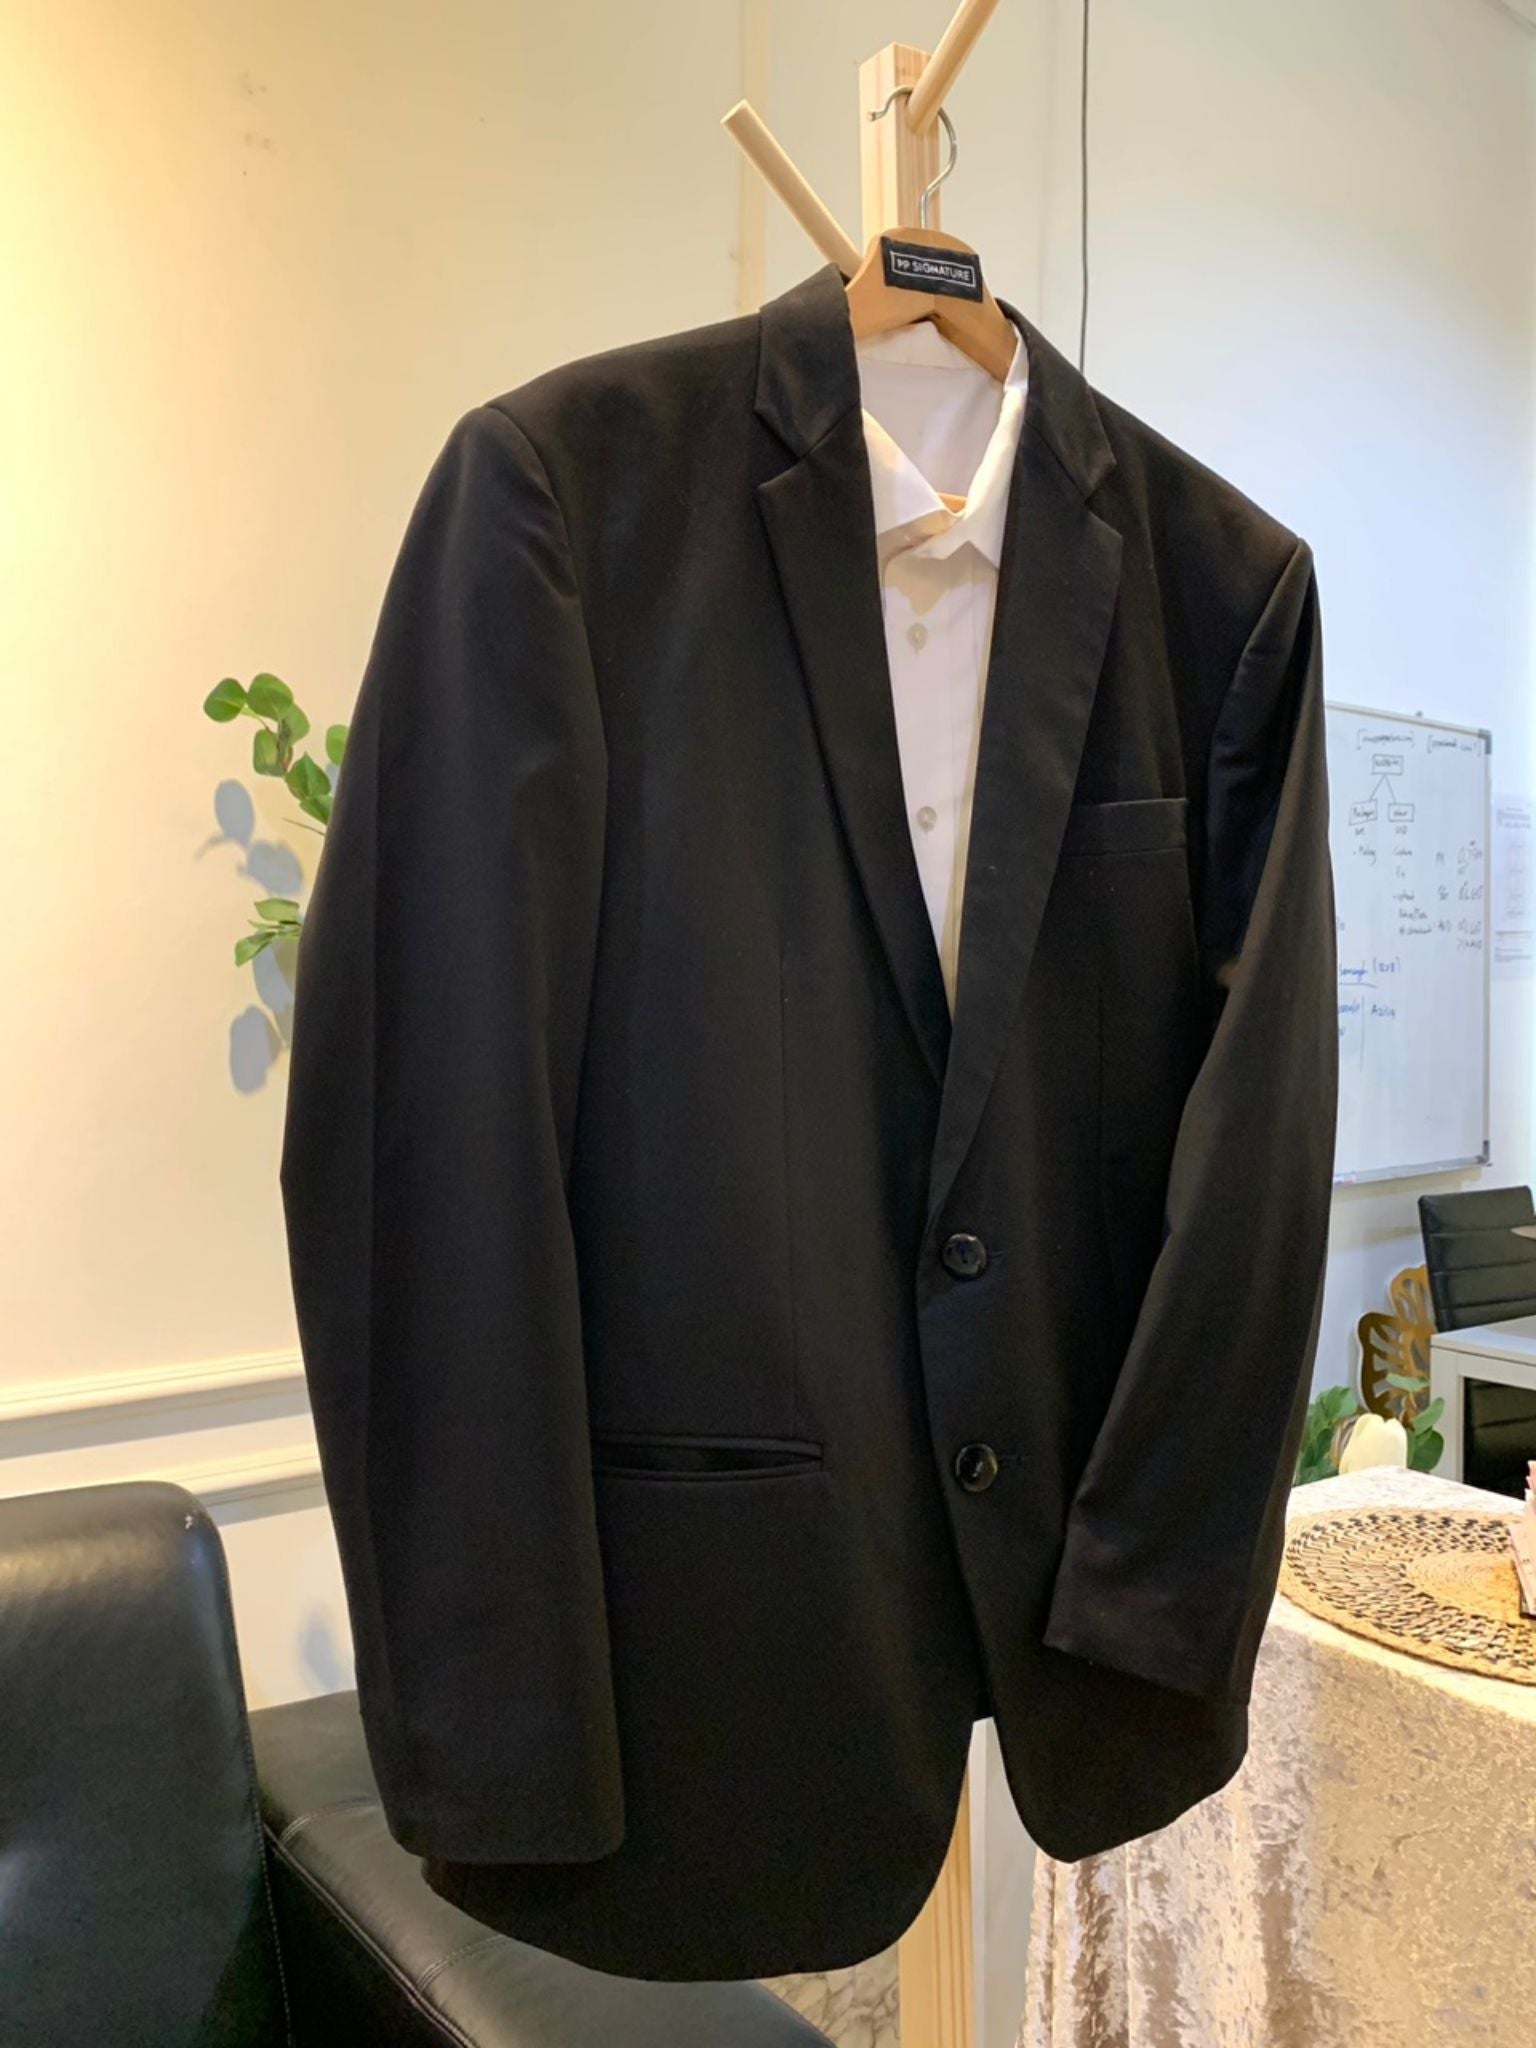 A close-up image of a black wedding suit with a notch lapel. The suit is made from high-quality wool fabric and is fully lined for a comfortable fit. It is the perfect choice for a formal occasion, such as a wedding or black tie gala.